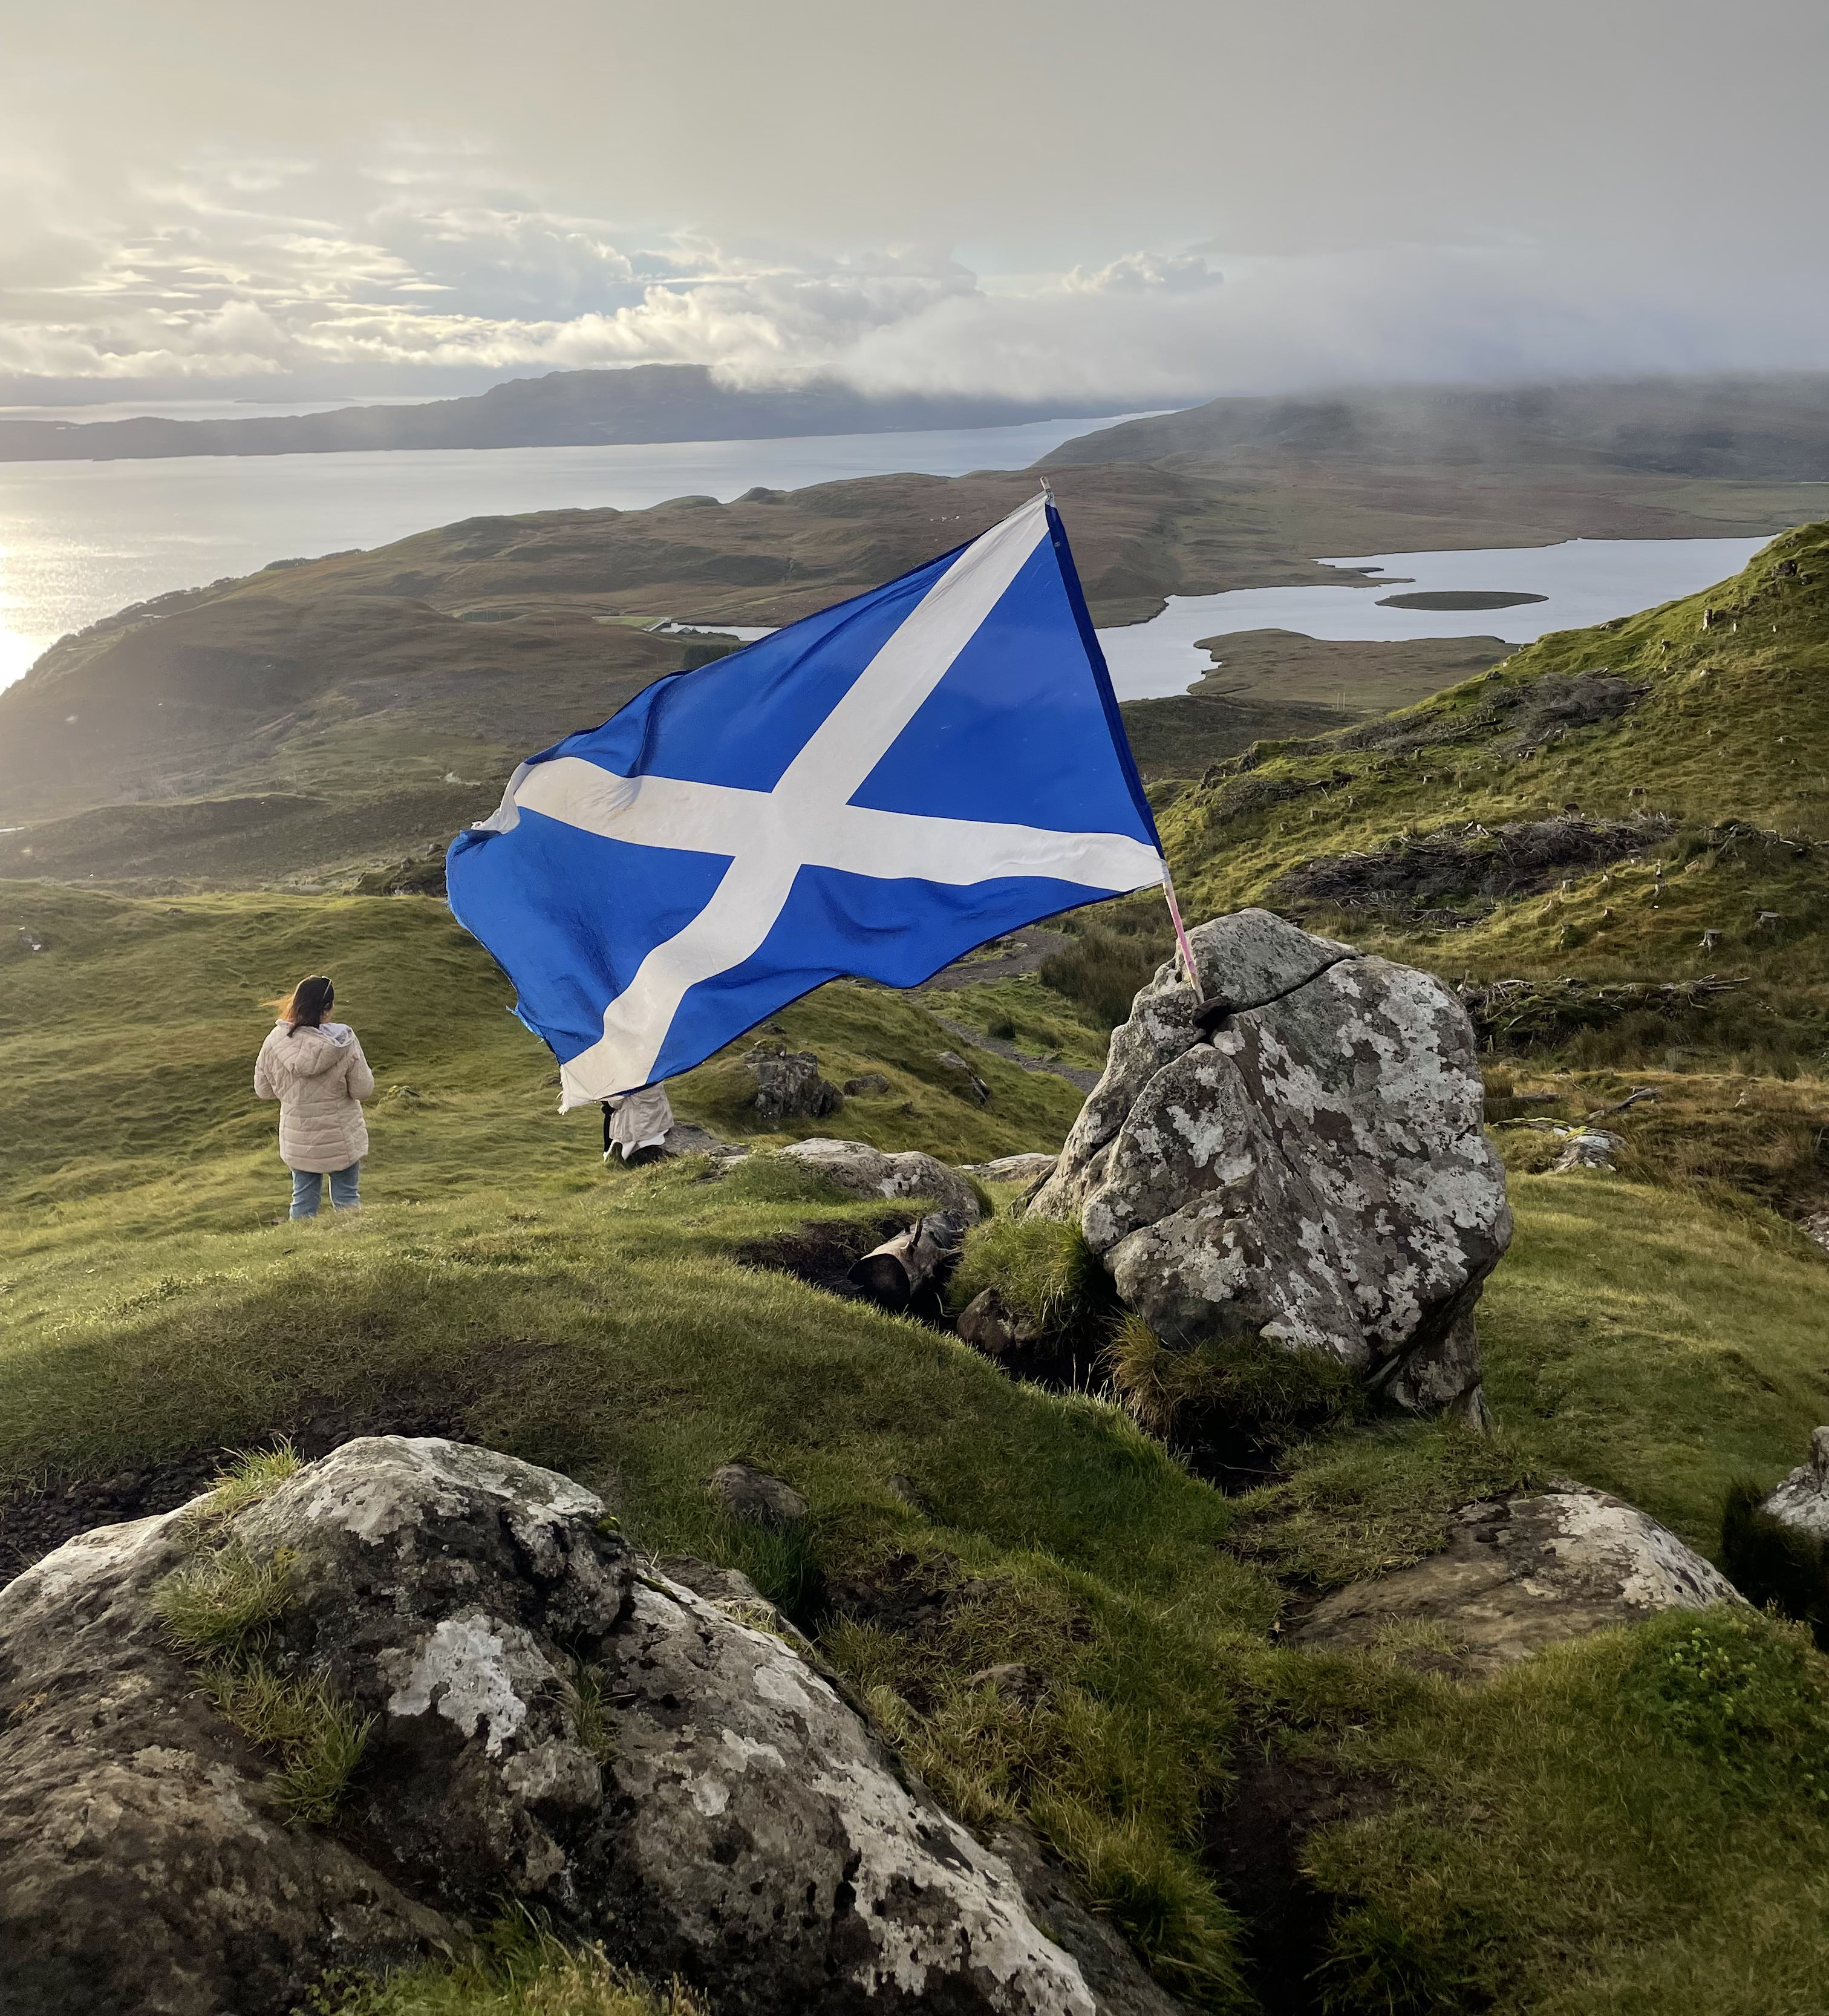 View of Scotland's flag from a mountain view.